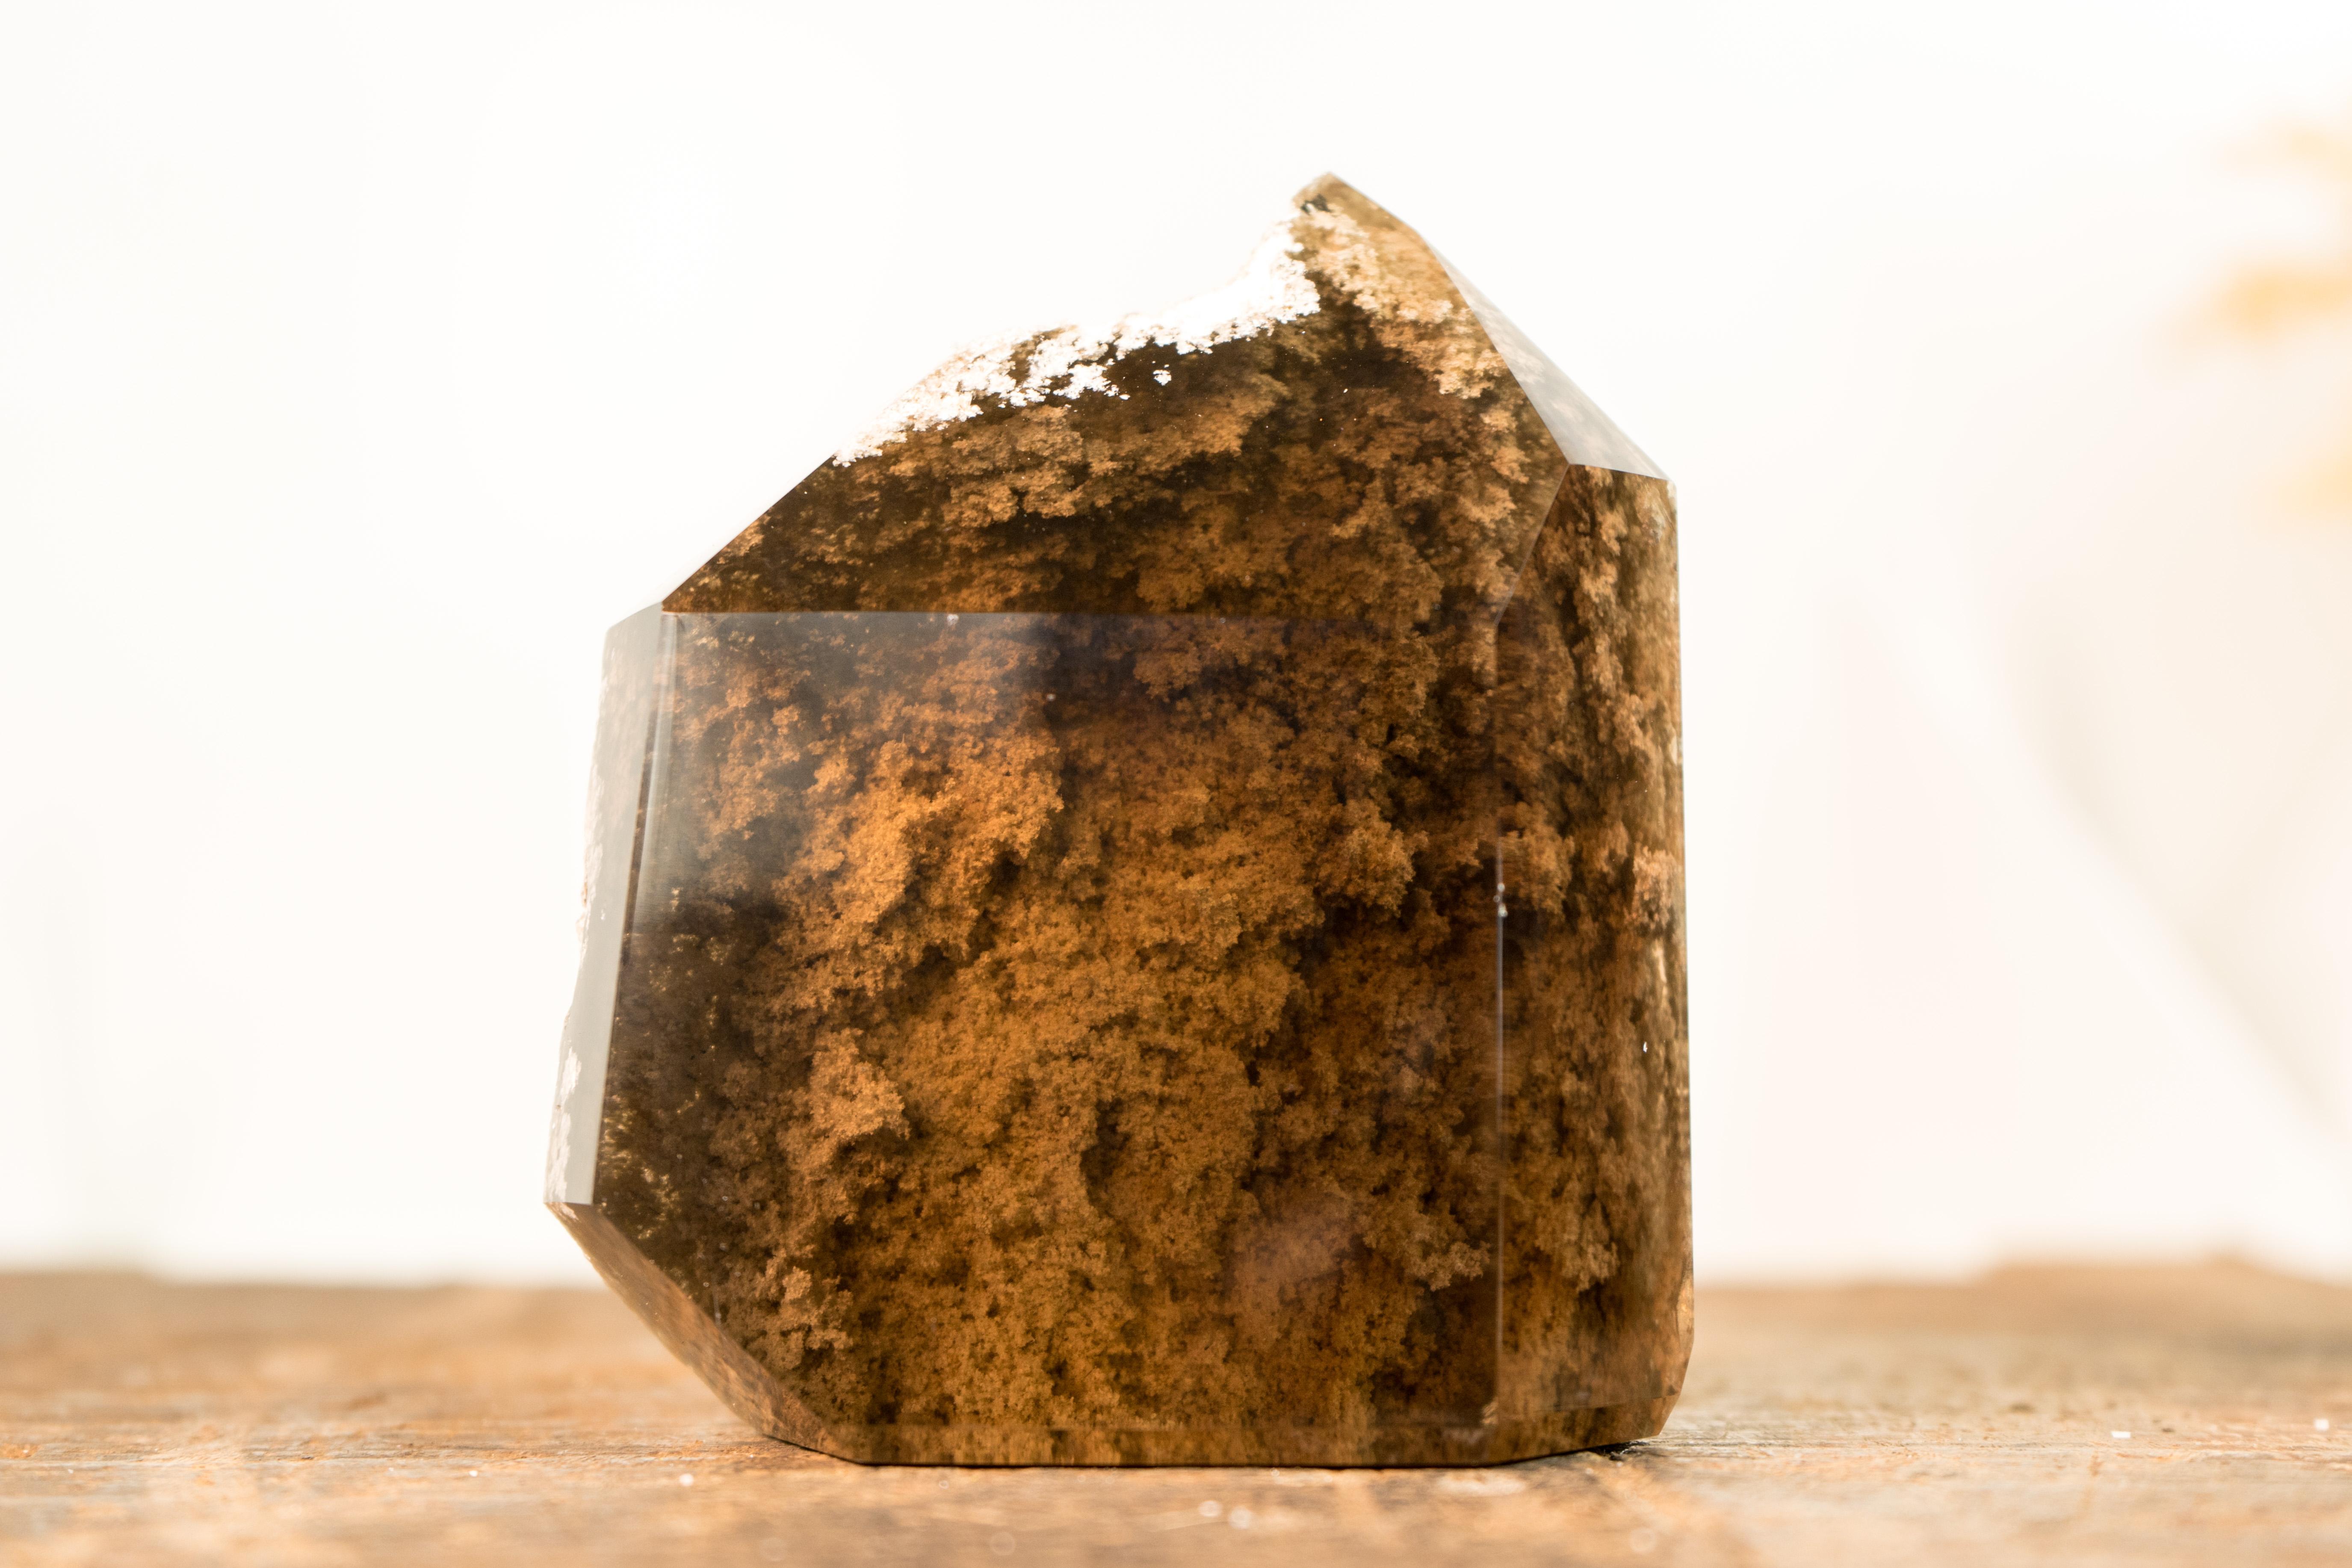 A play of contrasts: the old and the new, the raw and the polished. This Bronze Smoky Quartz offers a window to the past, encapsulating a landscape within a crystal, where the landscaped garden quartz can be fully appreciated through a window of